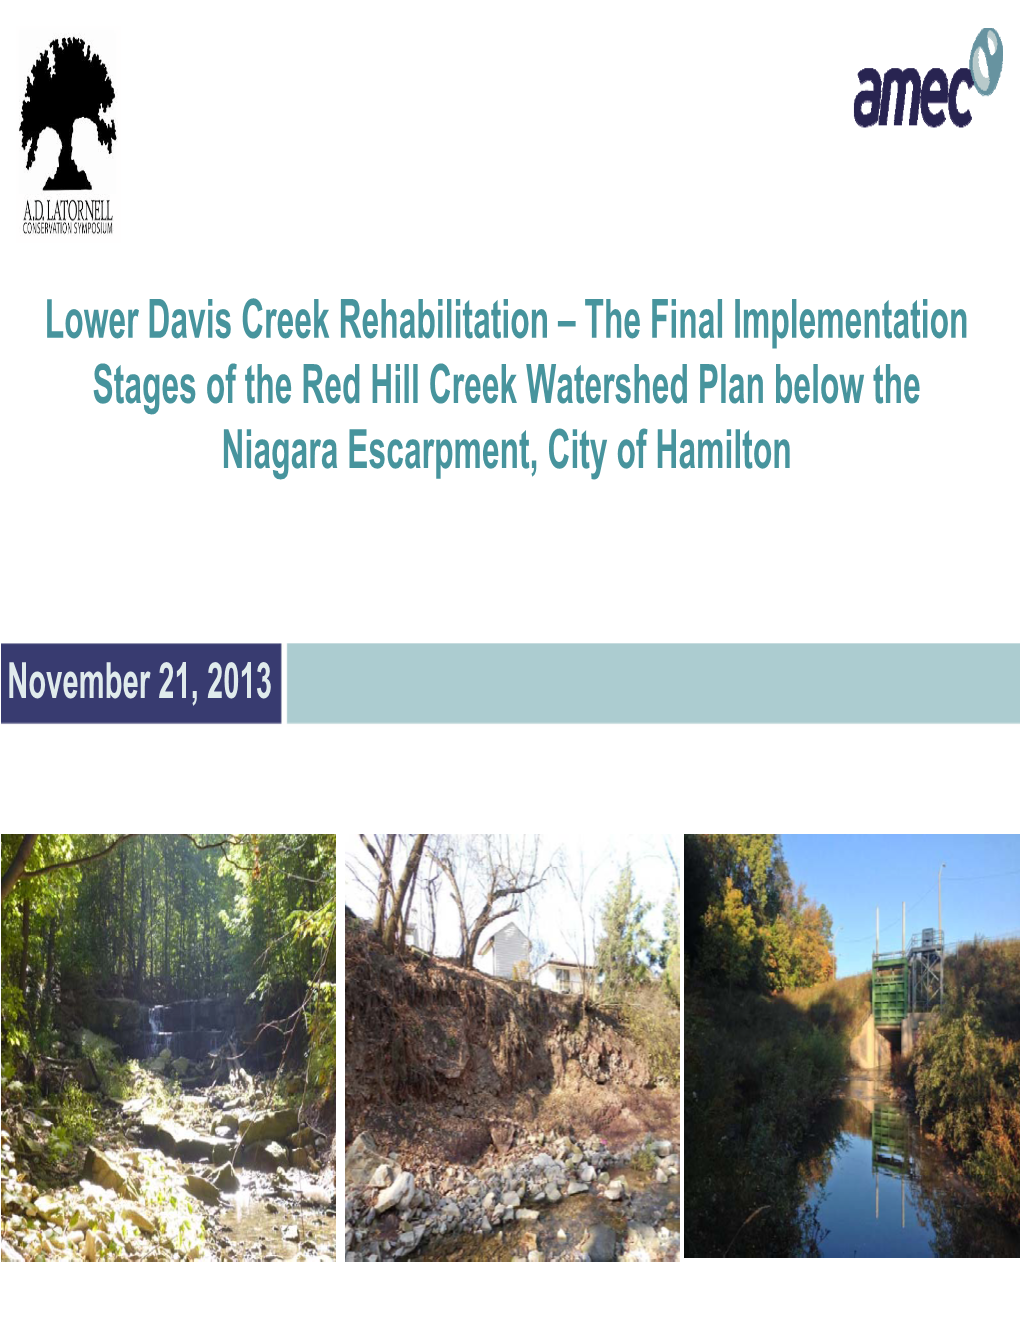 Lower Davis Creek Rehabilitation – the Final Implementation Stages of the Red Hill Creek Watershed Plan Below the Niagara Escarpment, City of Hamilton